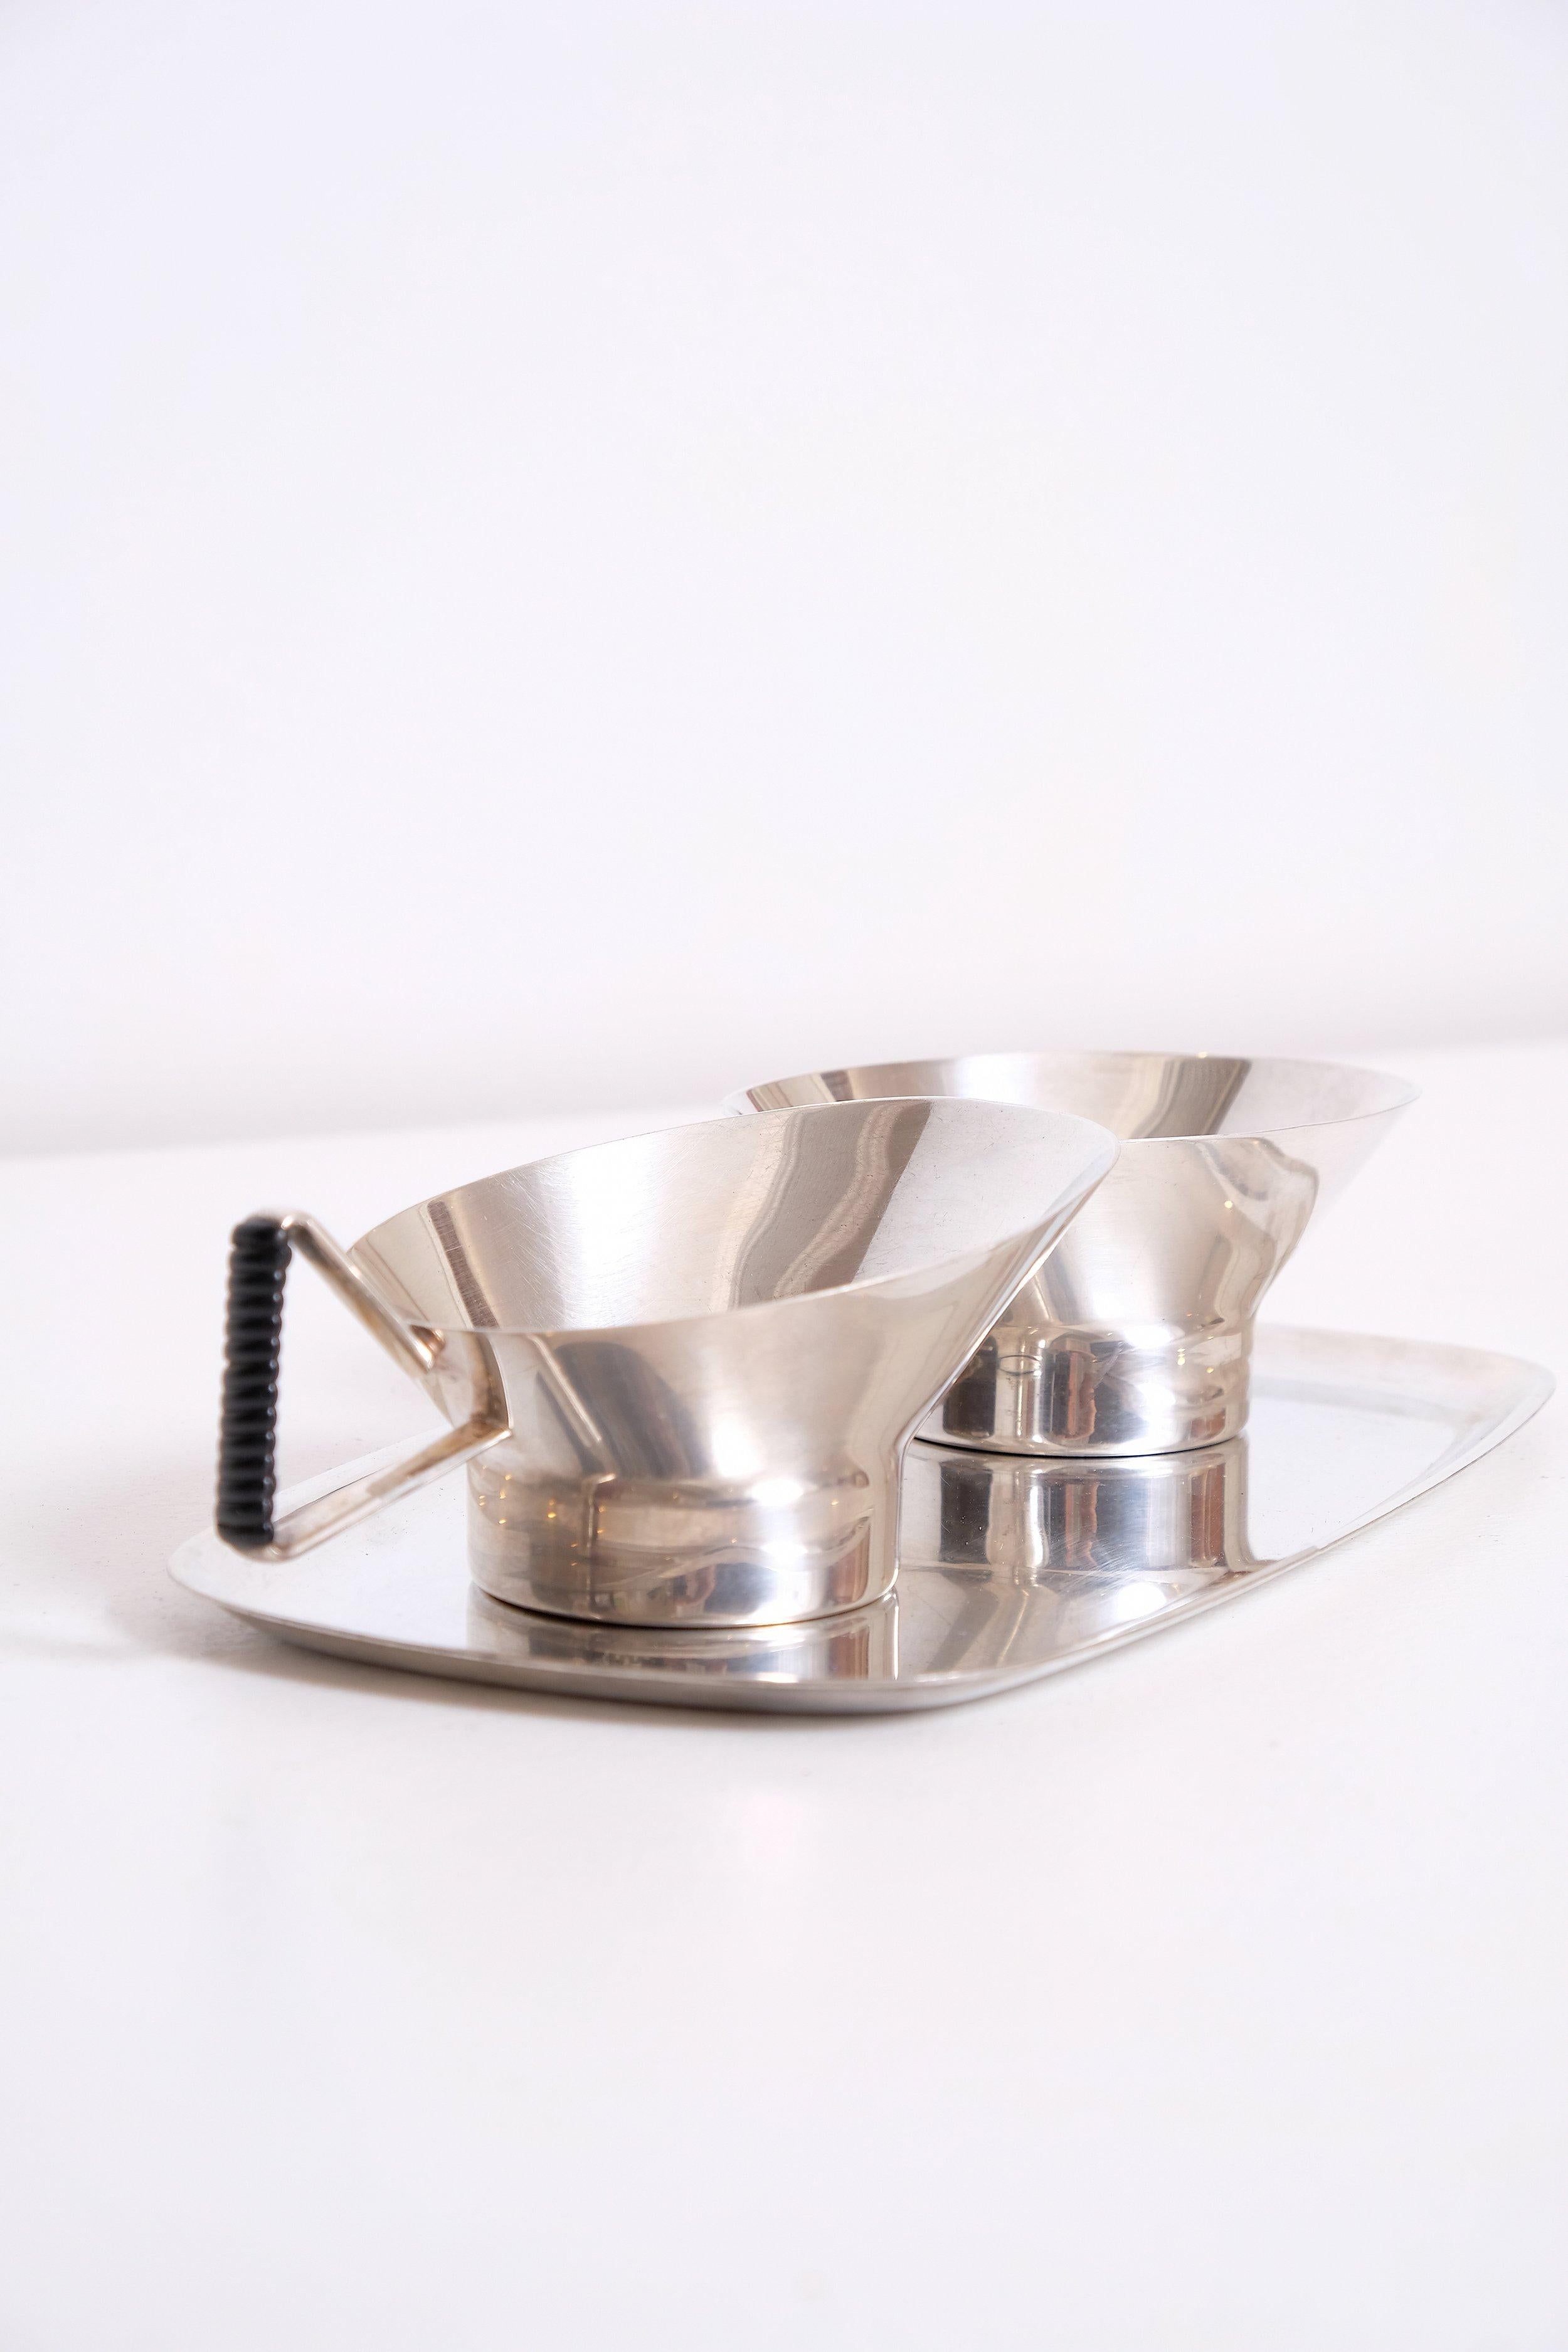 Elegant modernist silver plate Cream and sugar bowl and candy dish.

Light surface scratches throughout.

Creamer: 5” long x 3” wide x 2.5 ”high, Sugar: 4” long x 3” wide x 2.5 ”high, Tray 8” x 4.25”, Candy: 6” high x 5” wide